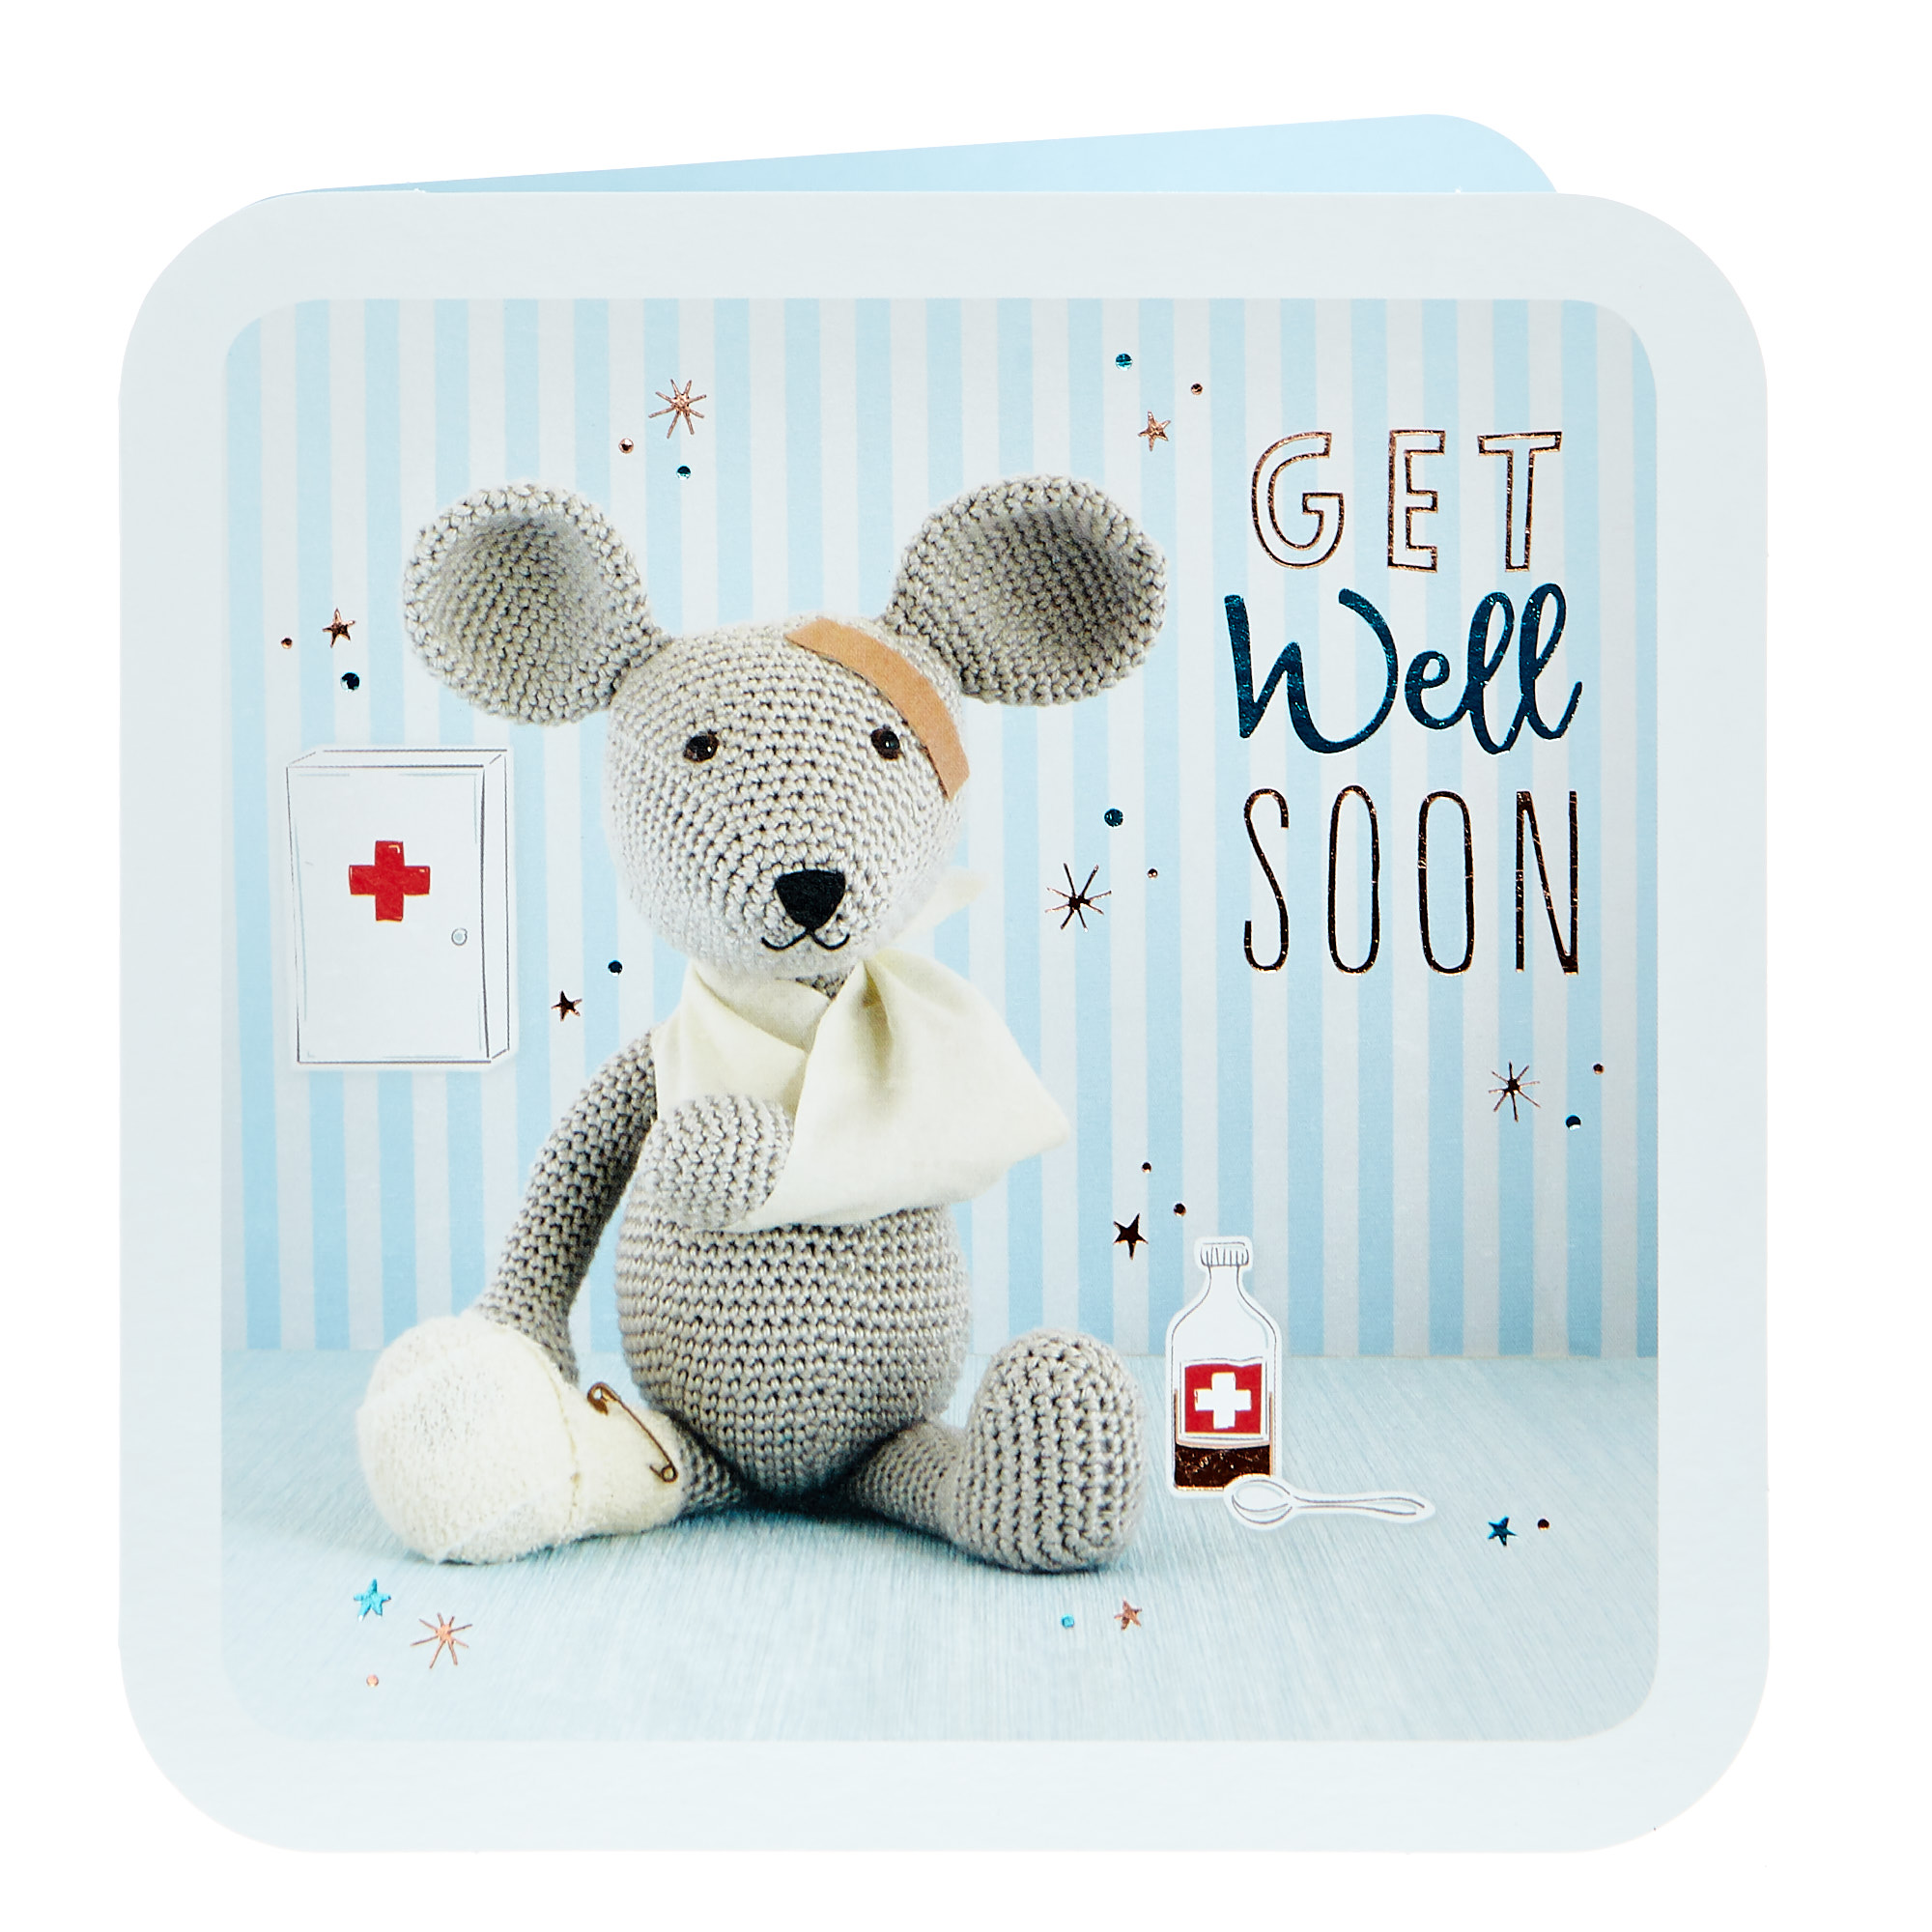 Get Well Soon Card - Knitted Mouse